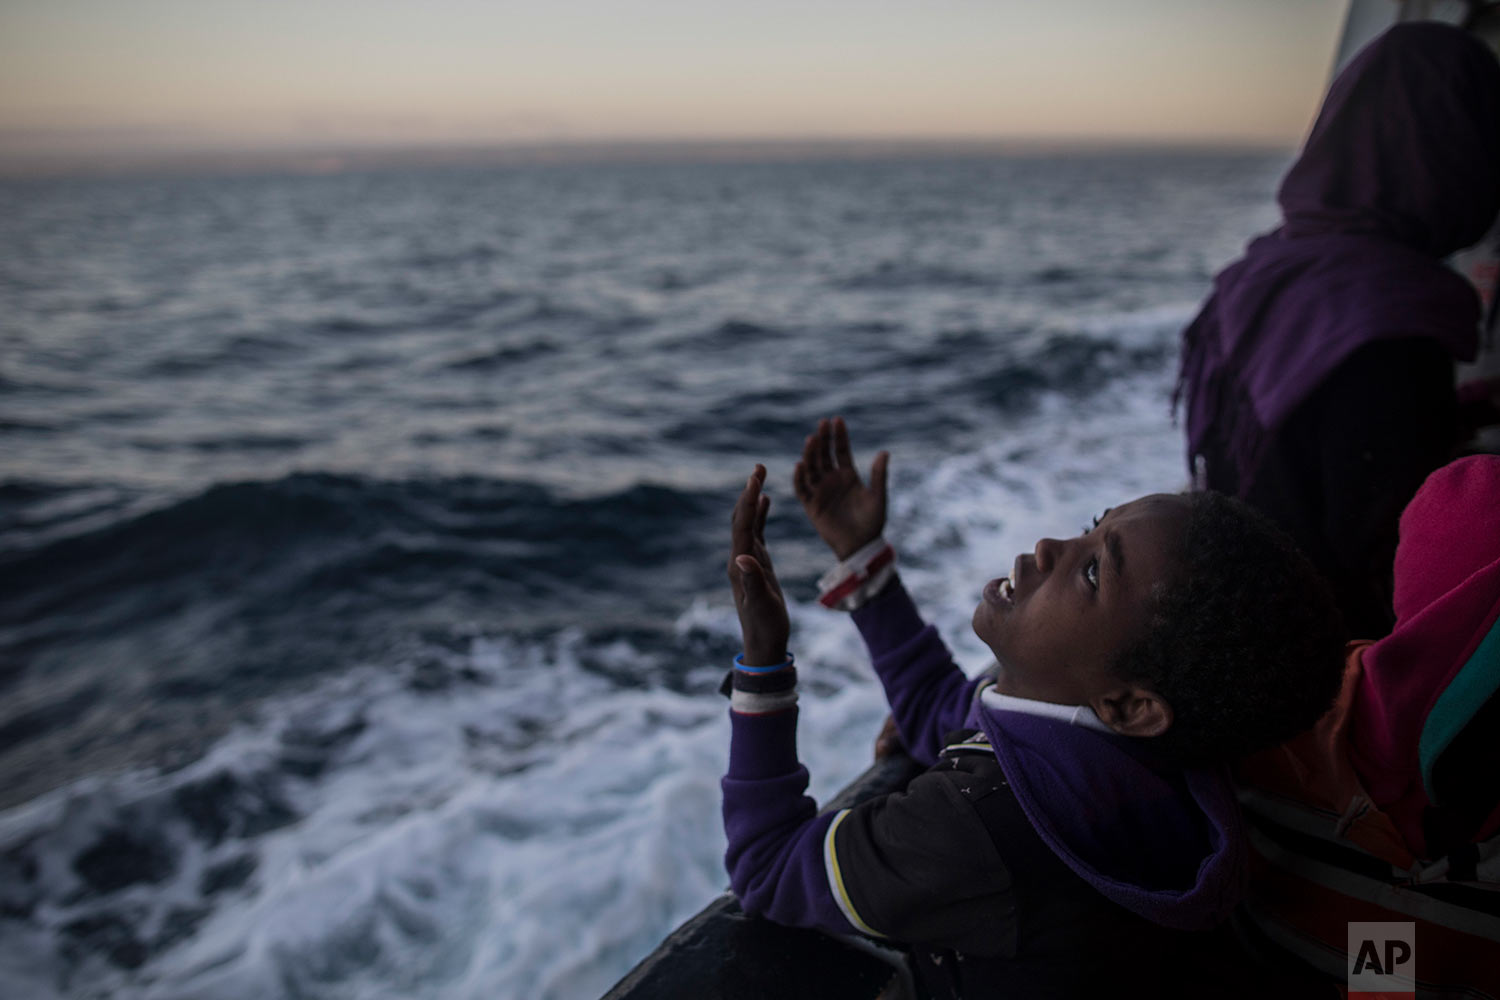  In this Friday, Jan. 19, 2018 photo a child from Eritrea sings to celebrate his arrival to Europe aboard the Spanish NGO Proactiva Open Arms rescue vessel, Pozzallo, Sicily, Italy. (AP Photo/Santi Palacios)&nbsp; |&nbsp; See these photos on AP Images  